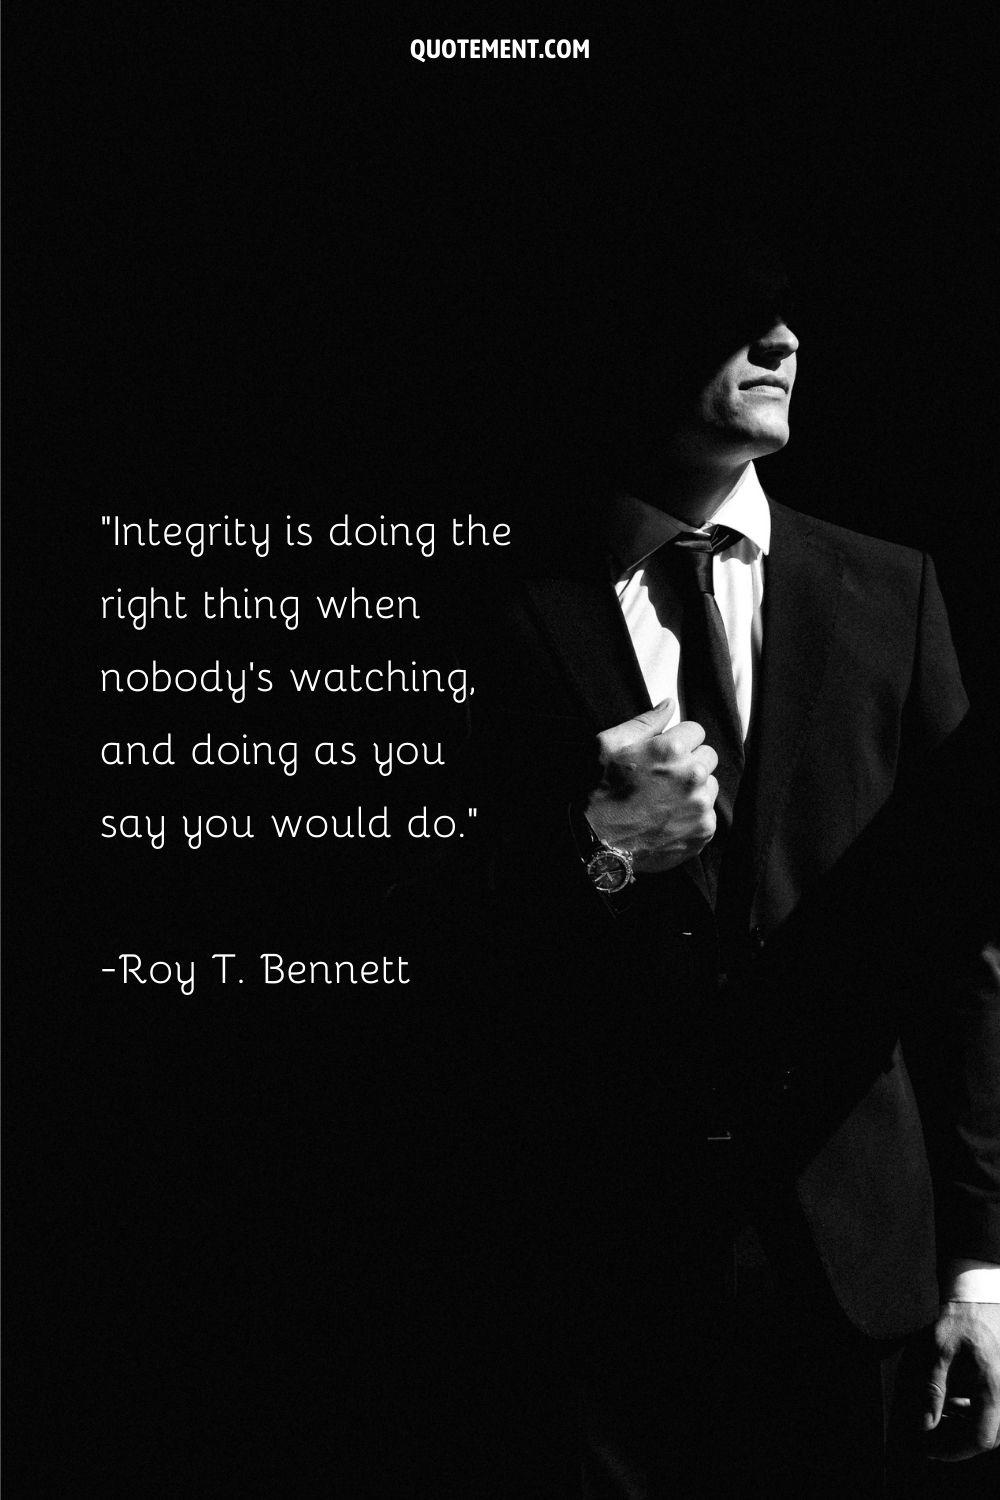 Integrity is doing the right thing when nobody's watching, and doing as you say you would do